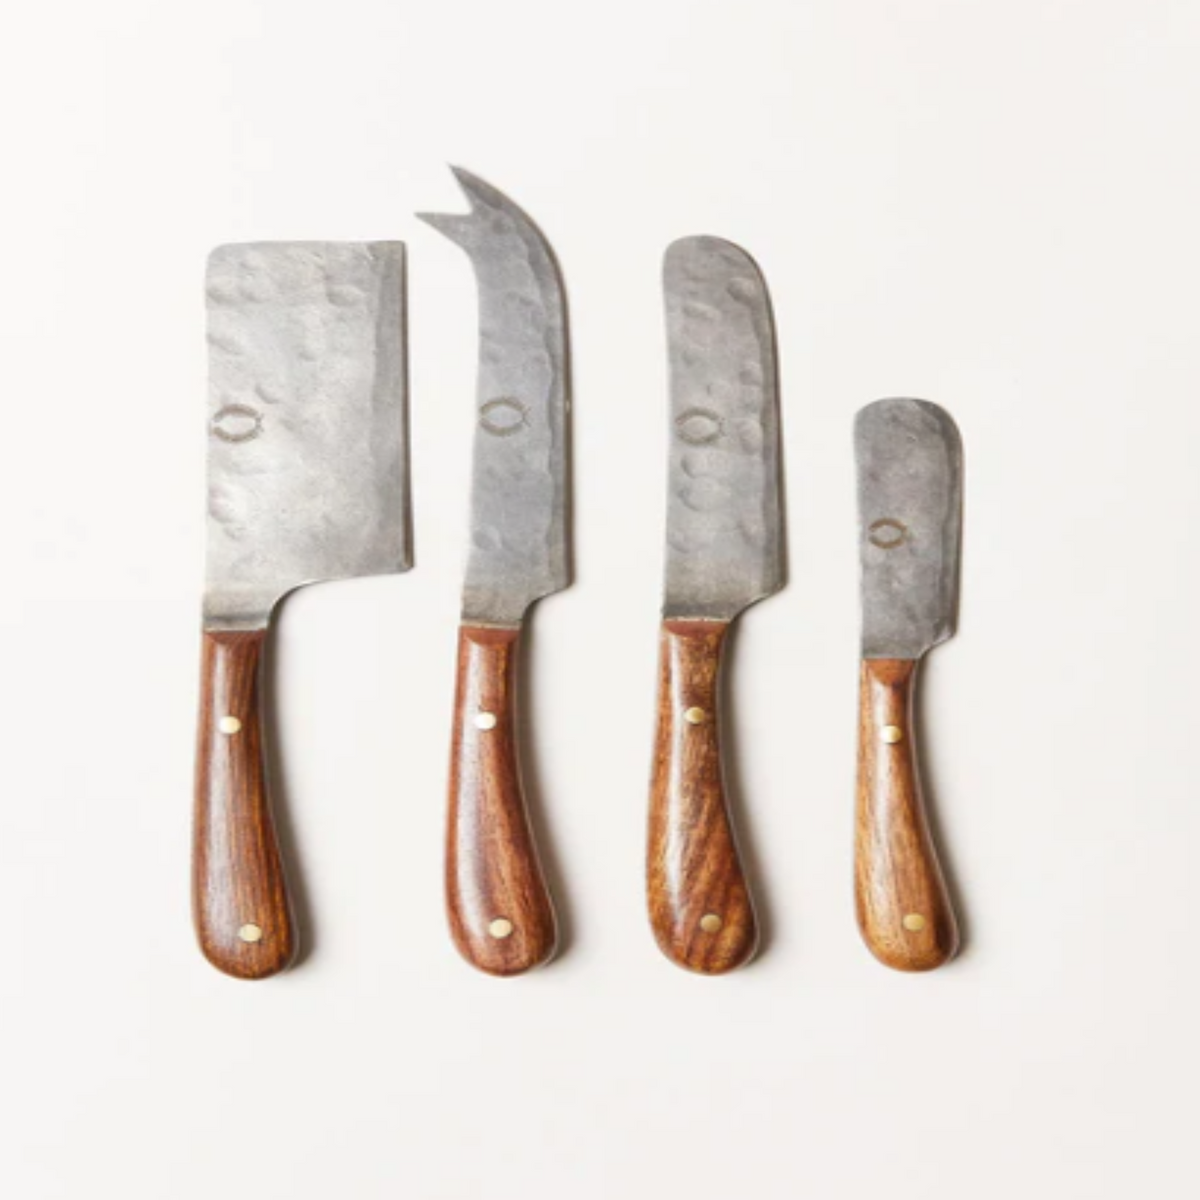 Artisan Forged Cheese Knifes - Set of 4